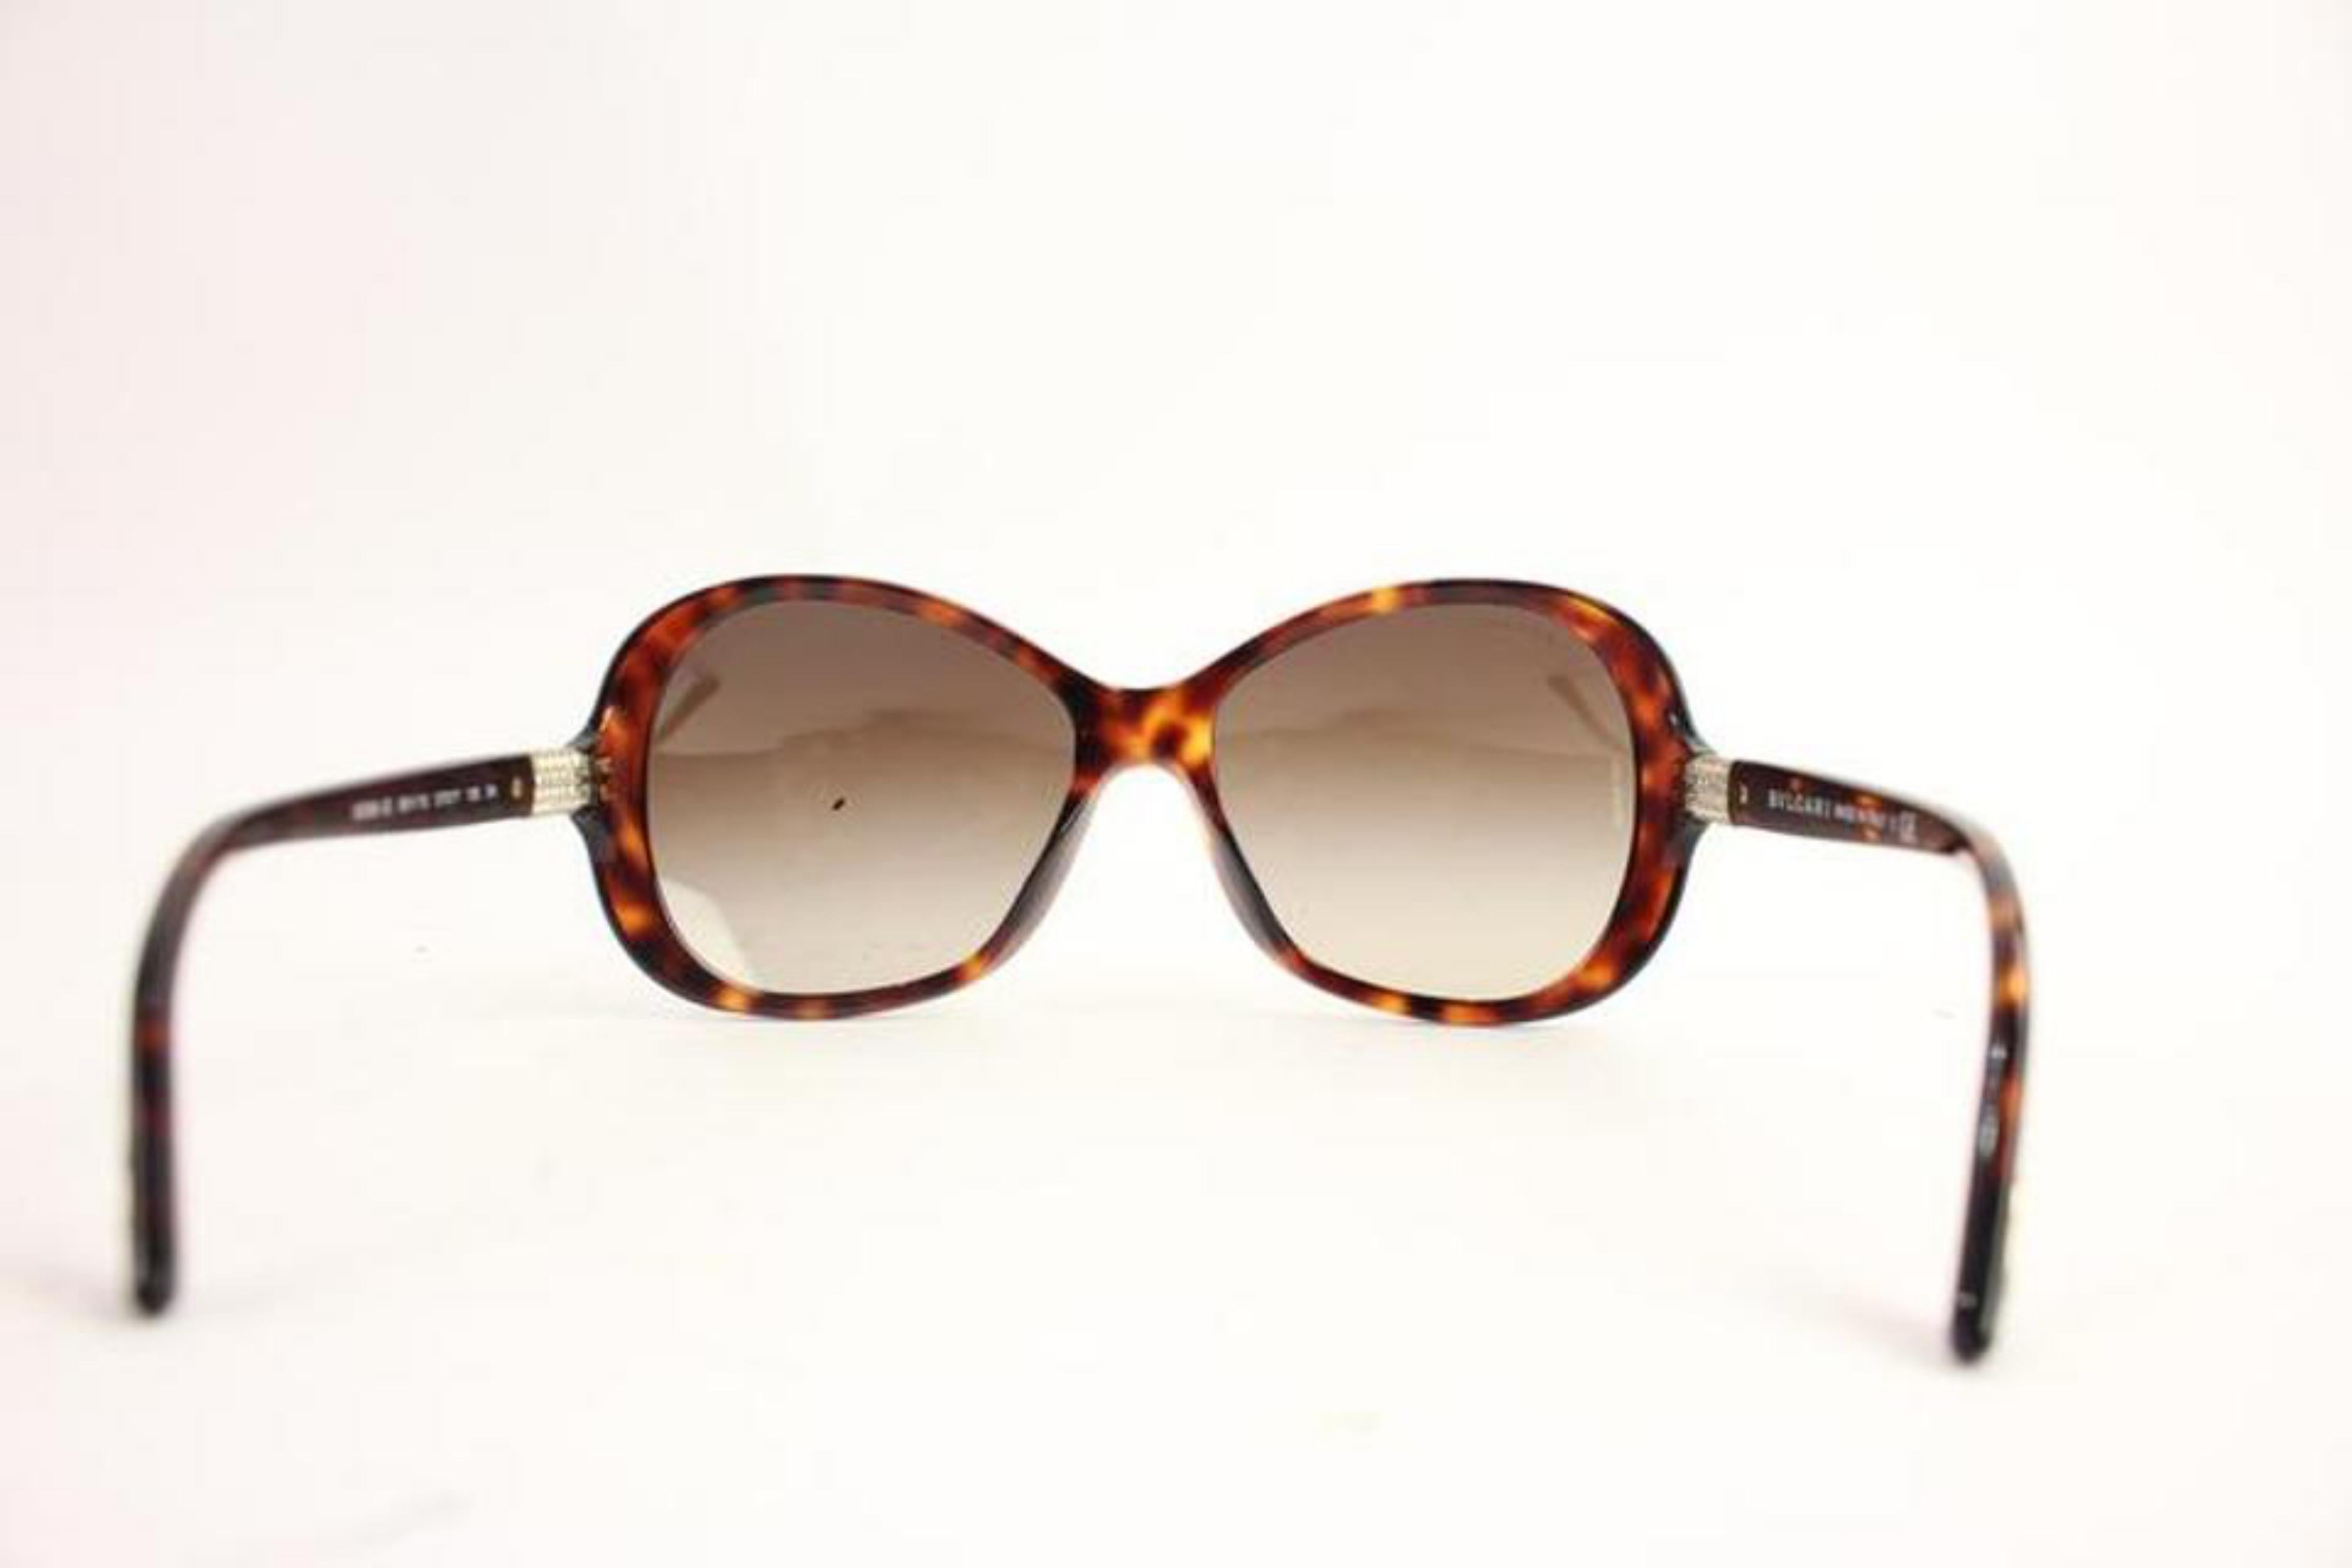 BVLGARI Brown 8068-b 48bgc920 Sunglasses In Fair Condition For Sale In Forest Hills, NY